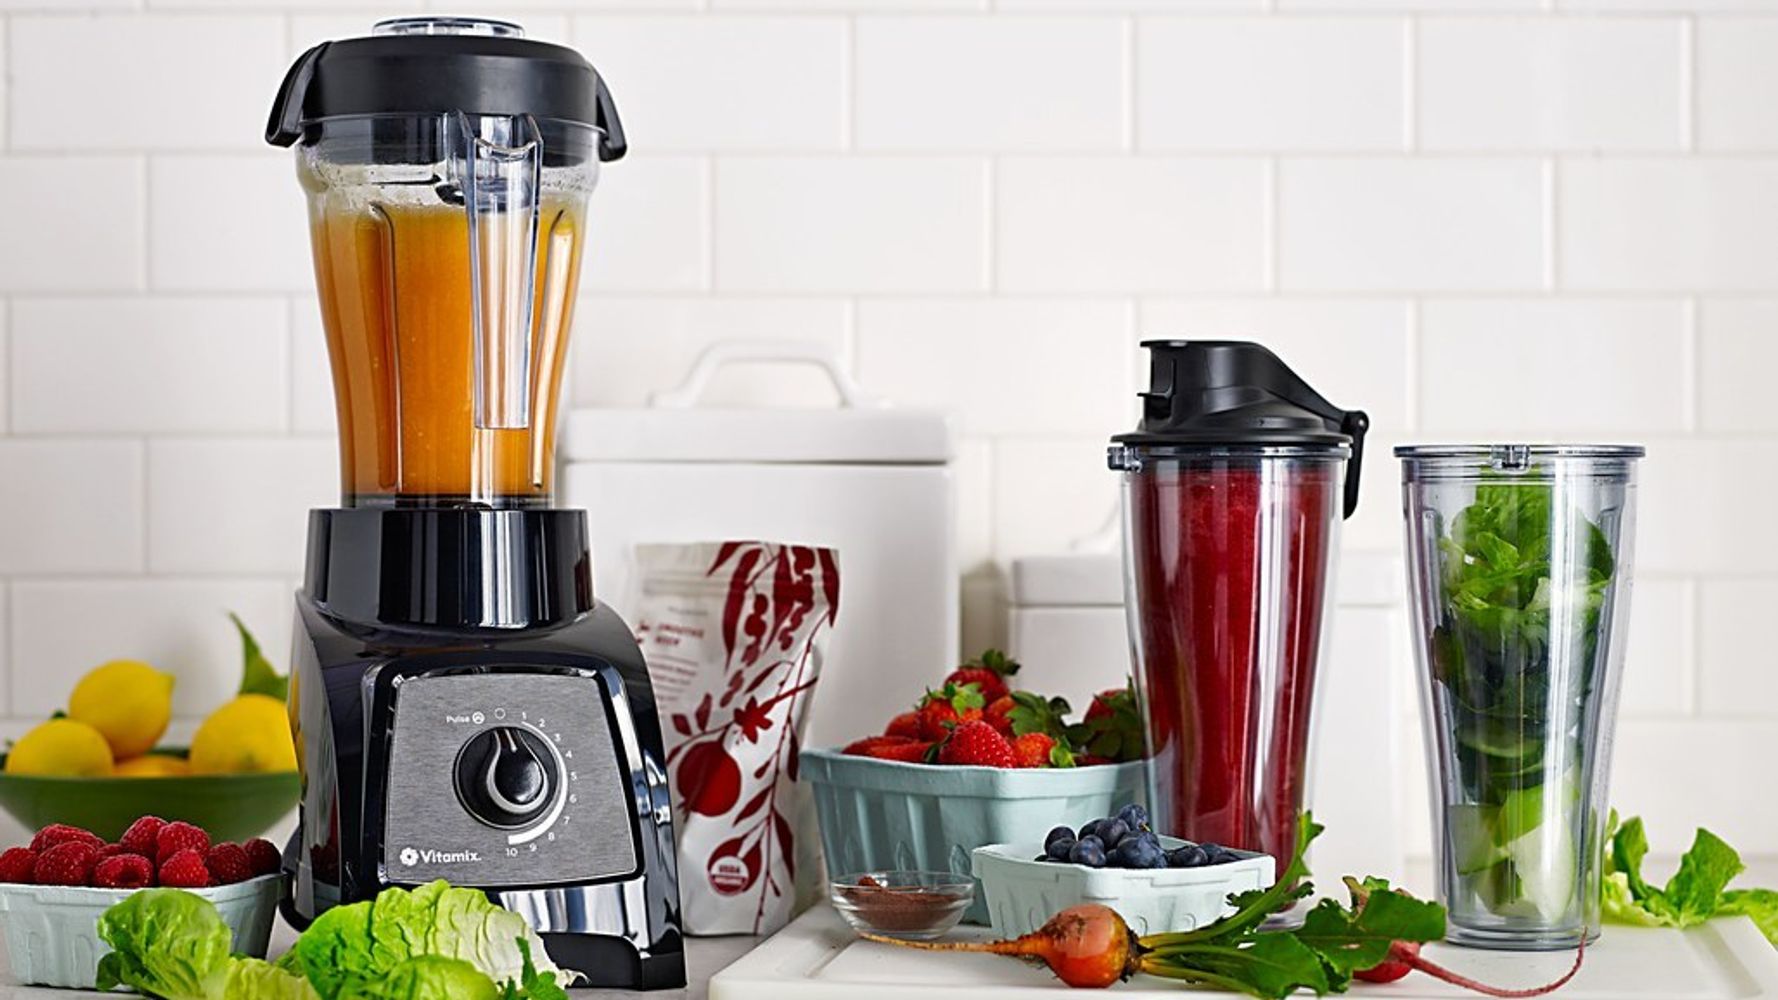 How to choose and buy the best blender in Israel on the bulletin board